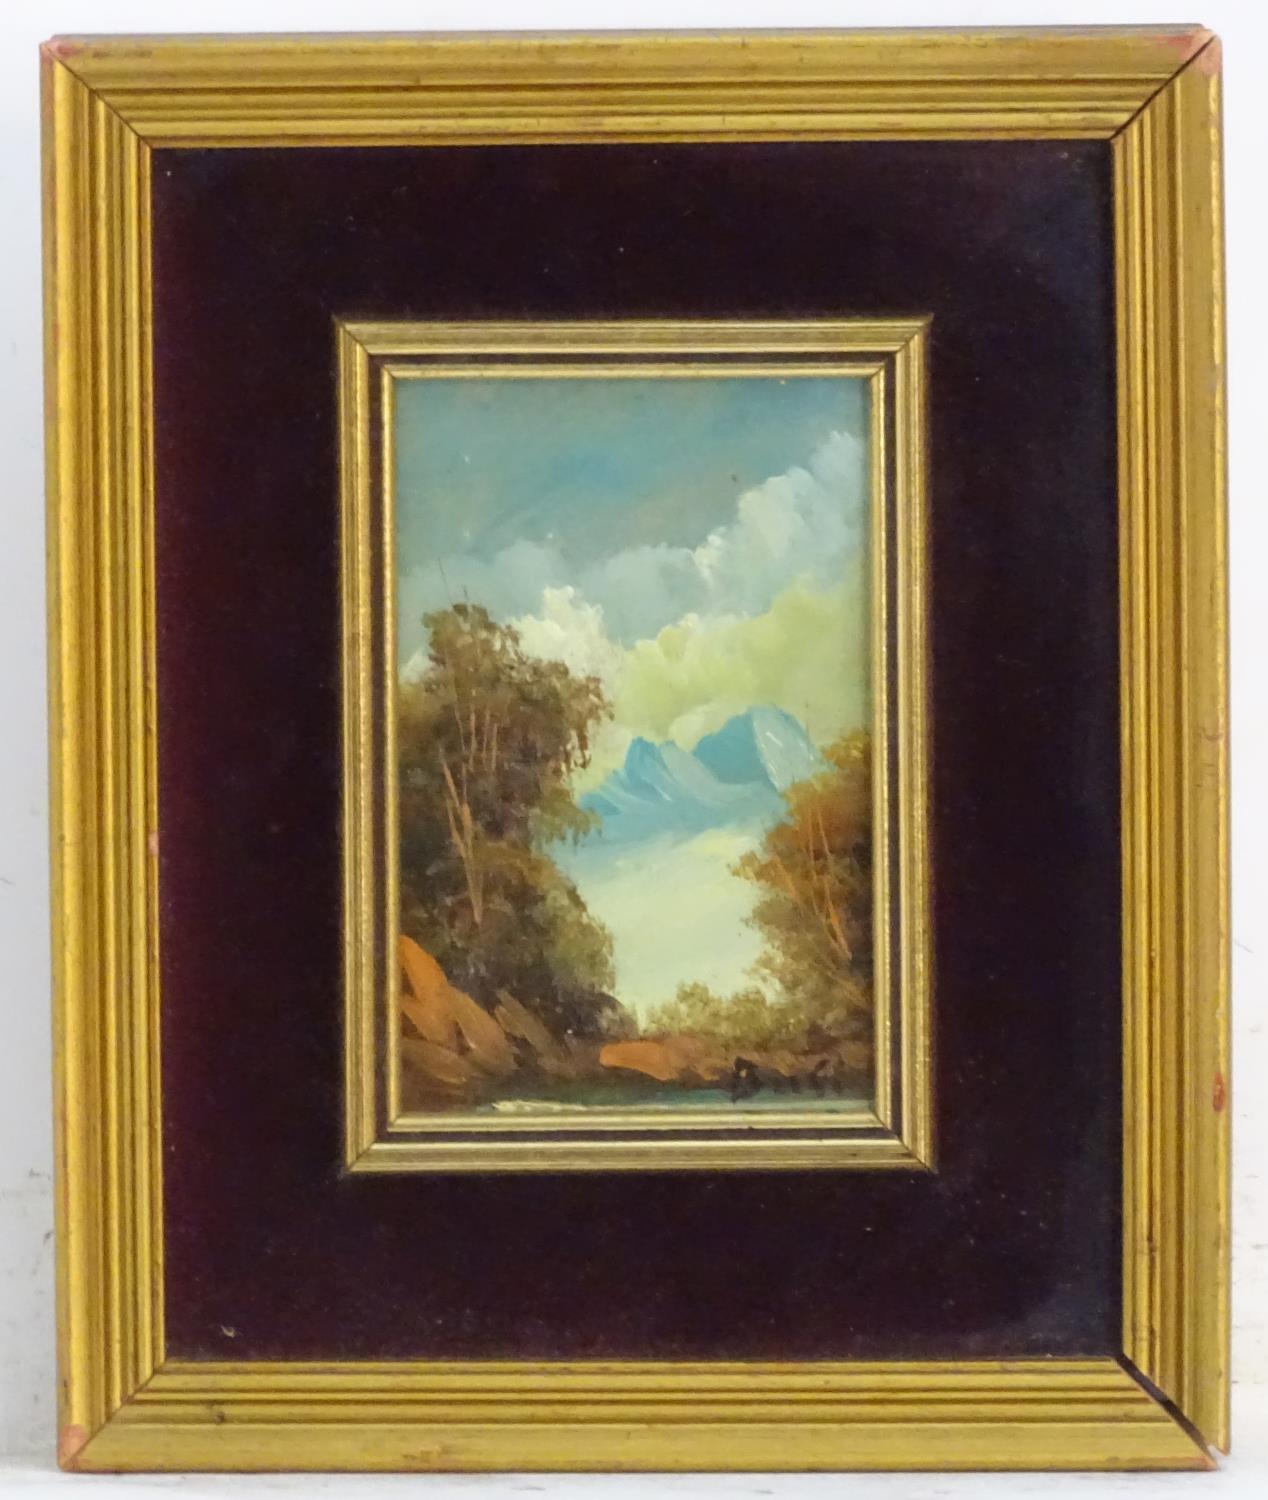 Buss, XX, Oil on board, A mountain landscape scene. Signed lower right. Approx. 5 1/2" x 3 1/2" - Image 3 of 5